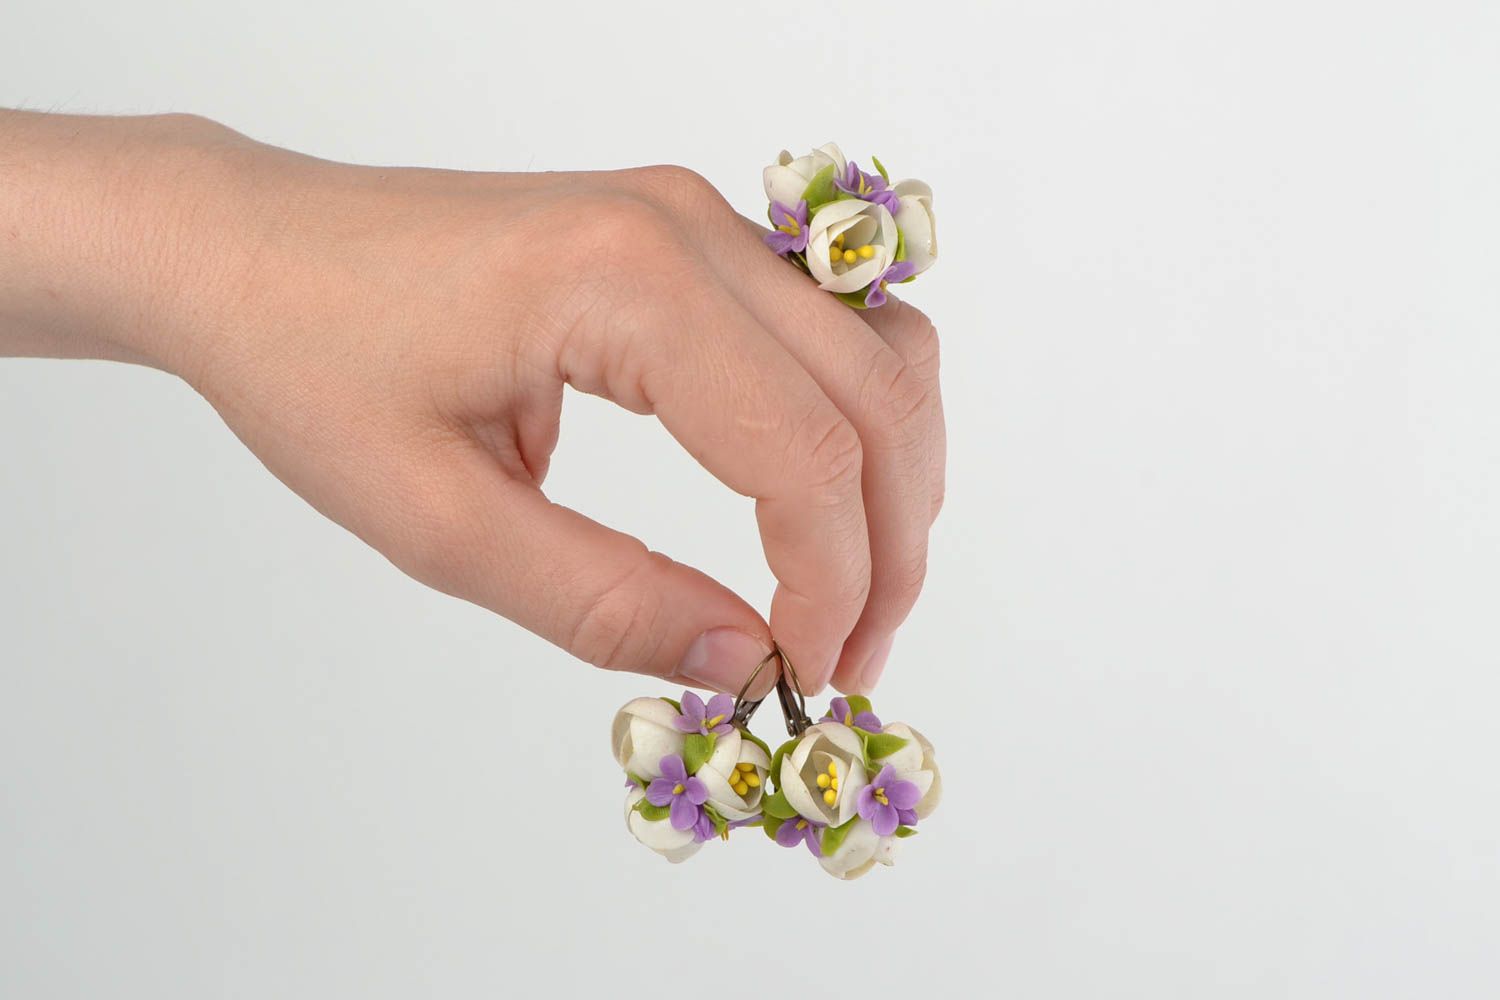 Earrings and a ring made of cold porcelain with white flowers handmade set photo 1